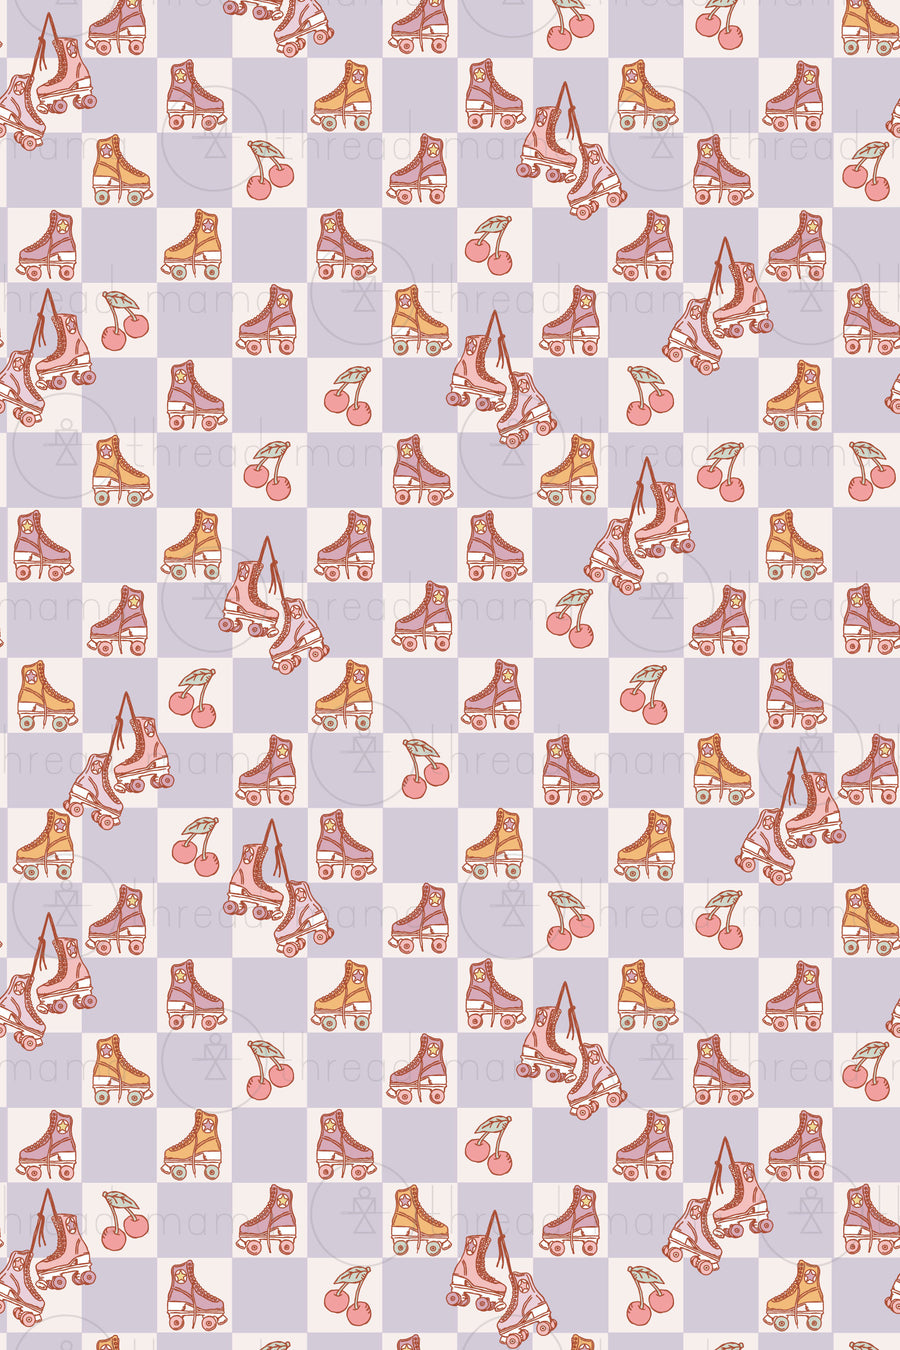 Repeating Pattern 207 (Seamless)